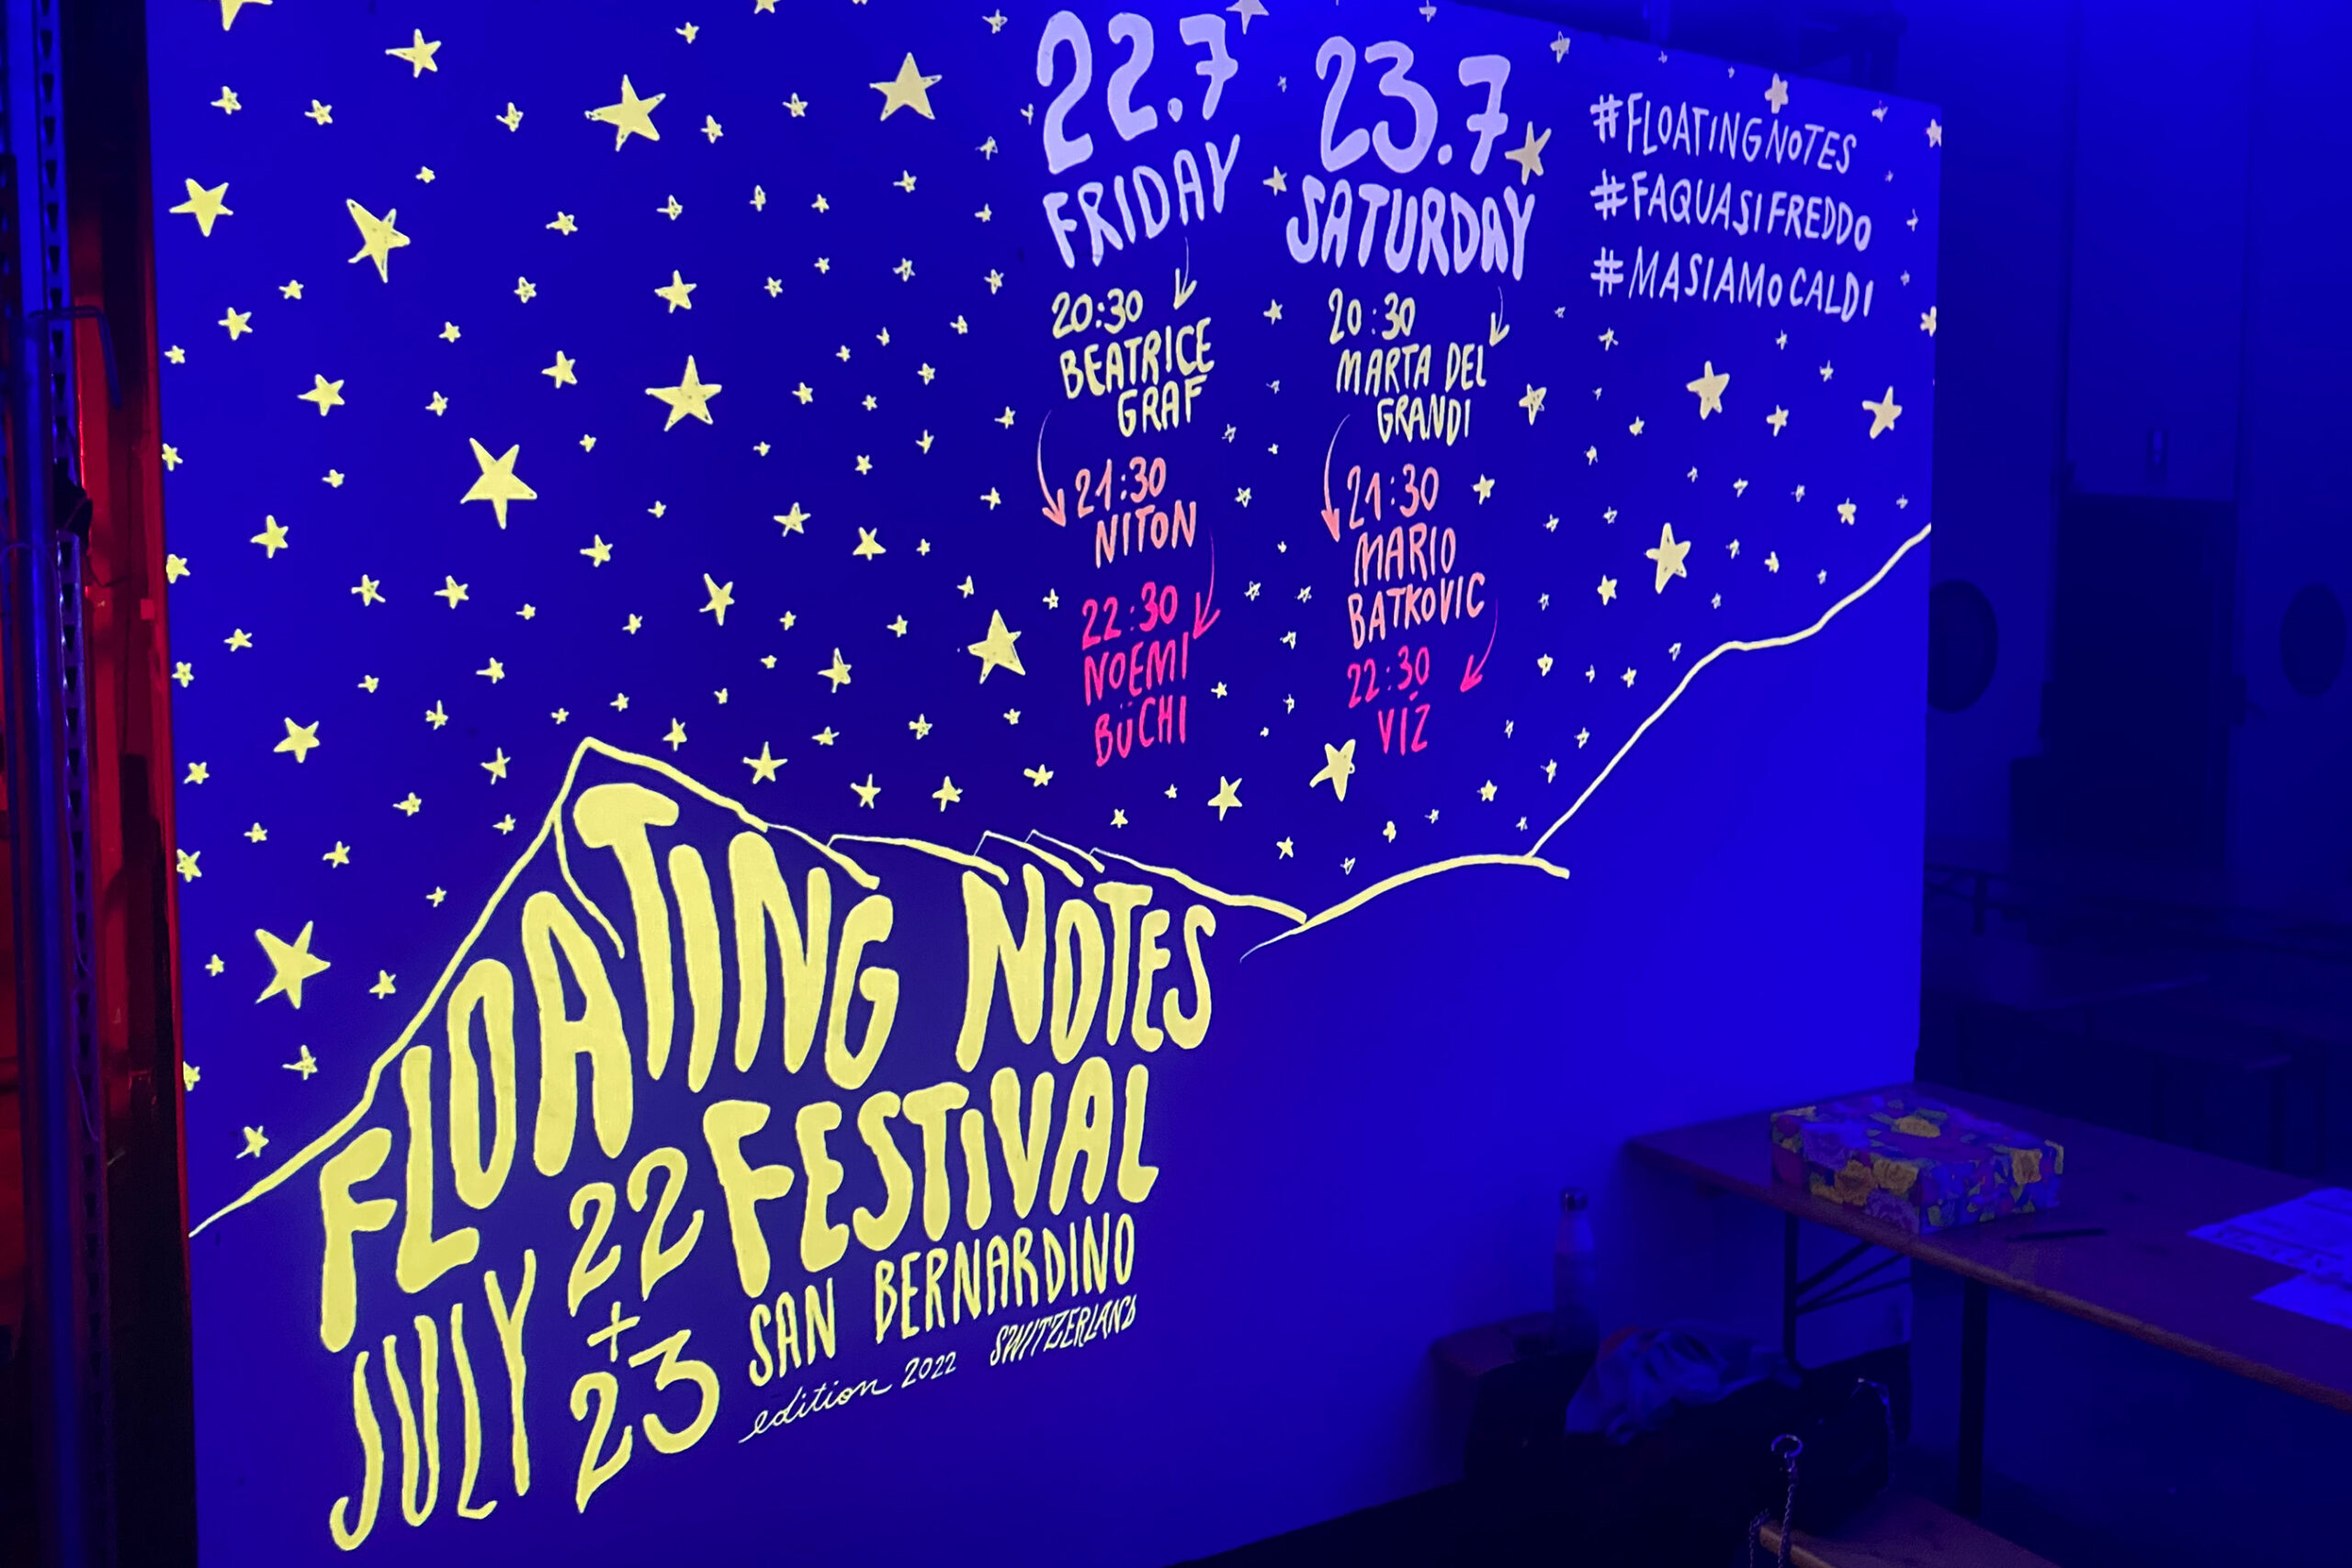 Floating Notes Festival: outside the mainstream